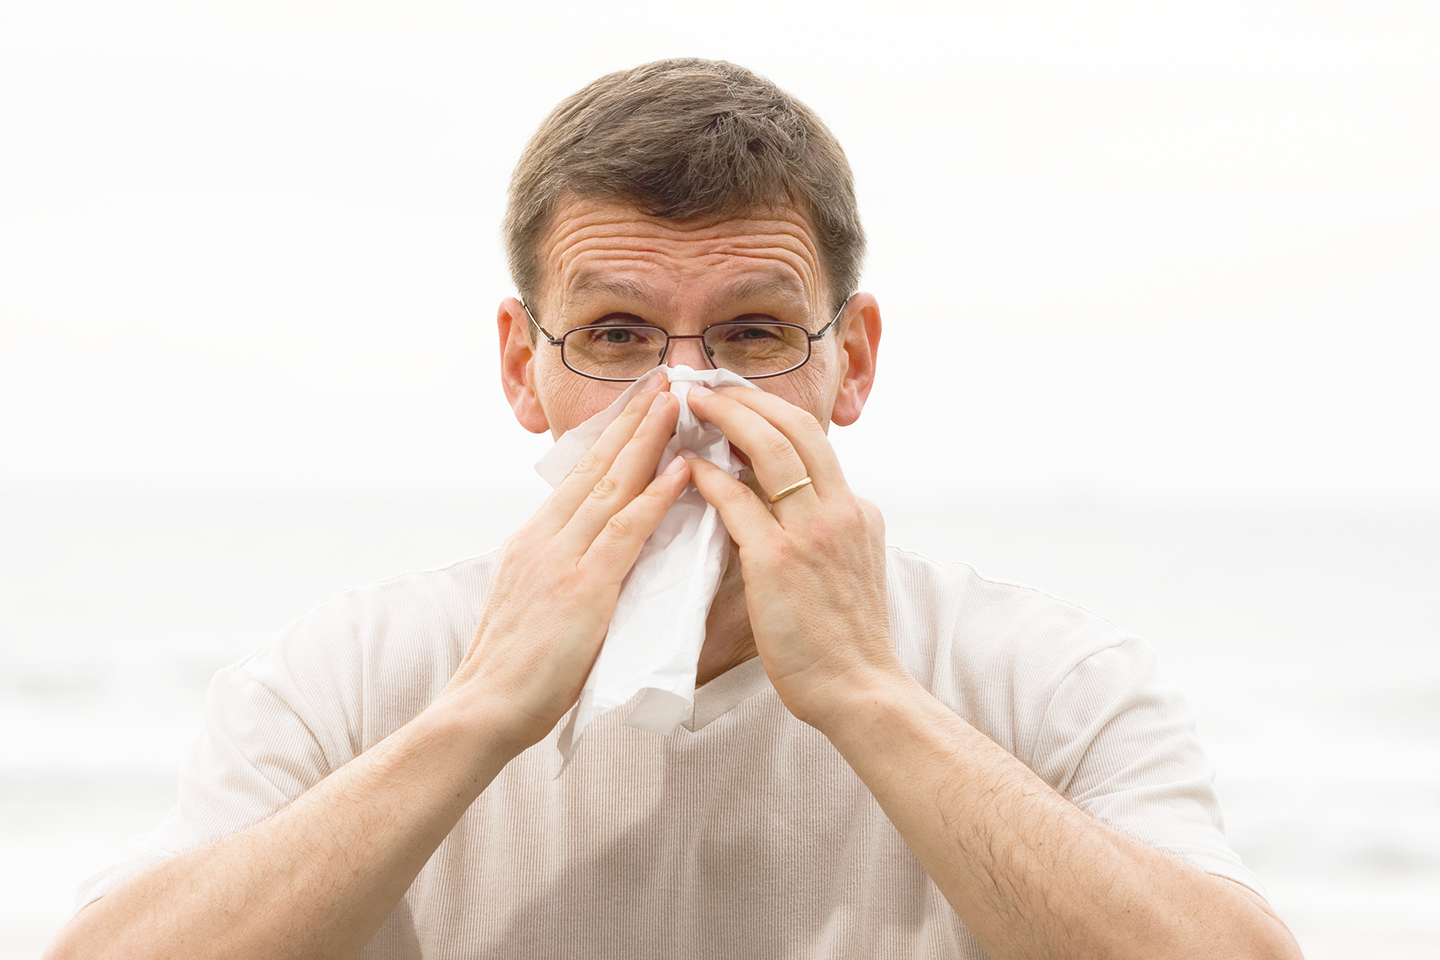 A man blowing his nose with a cold caused by germs